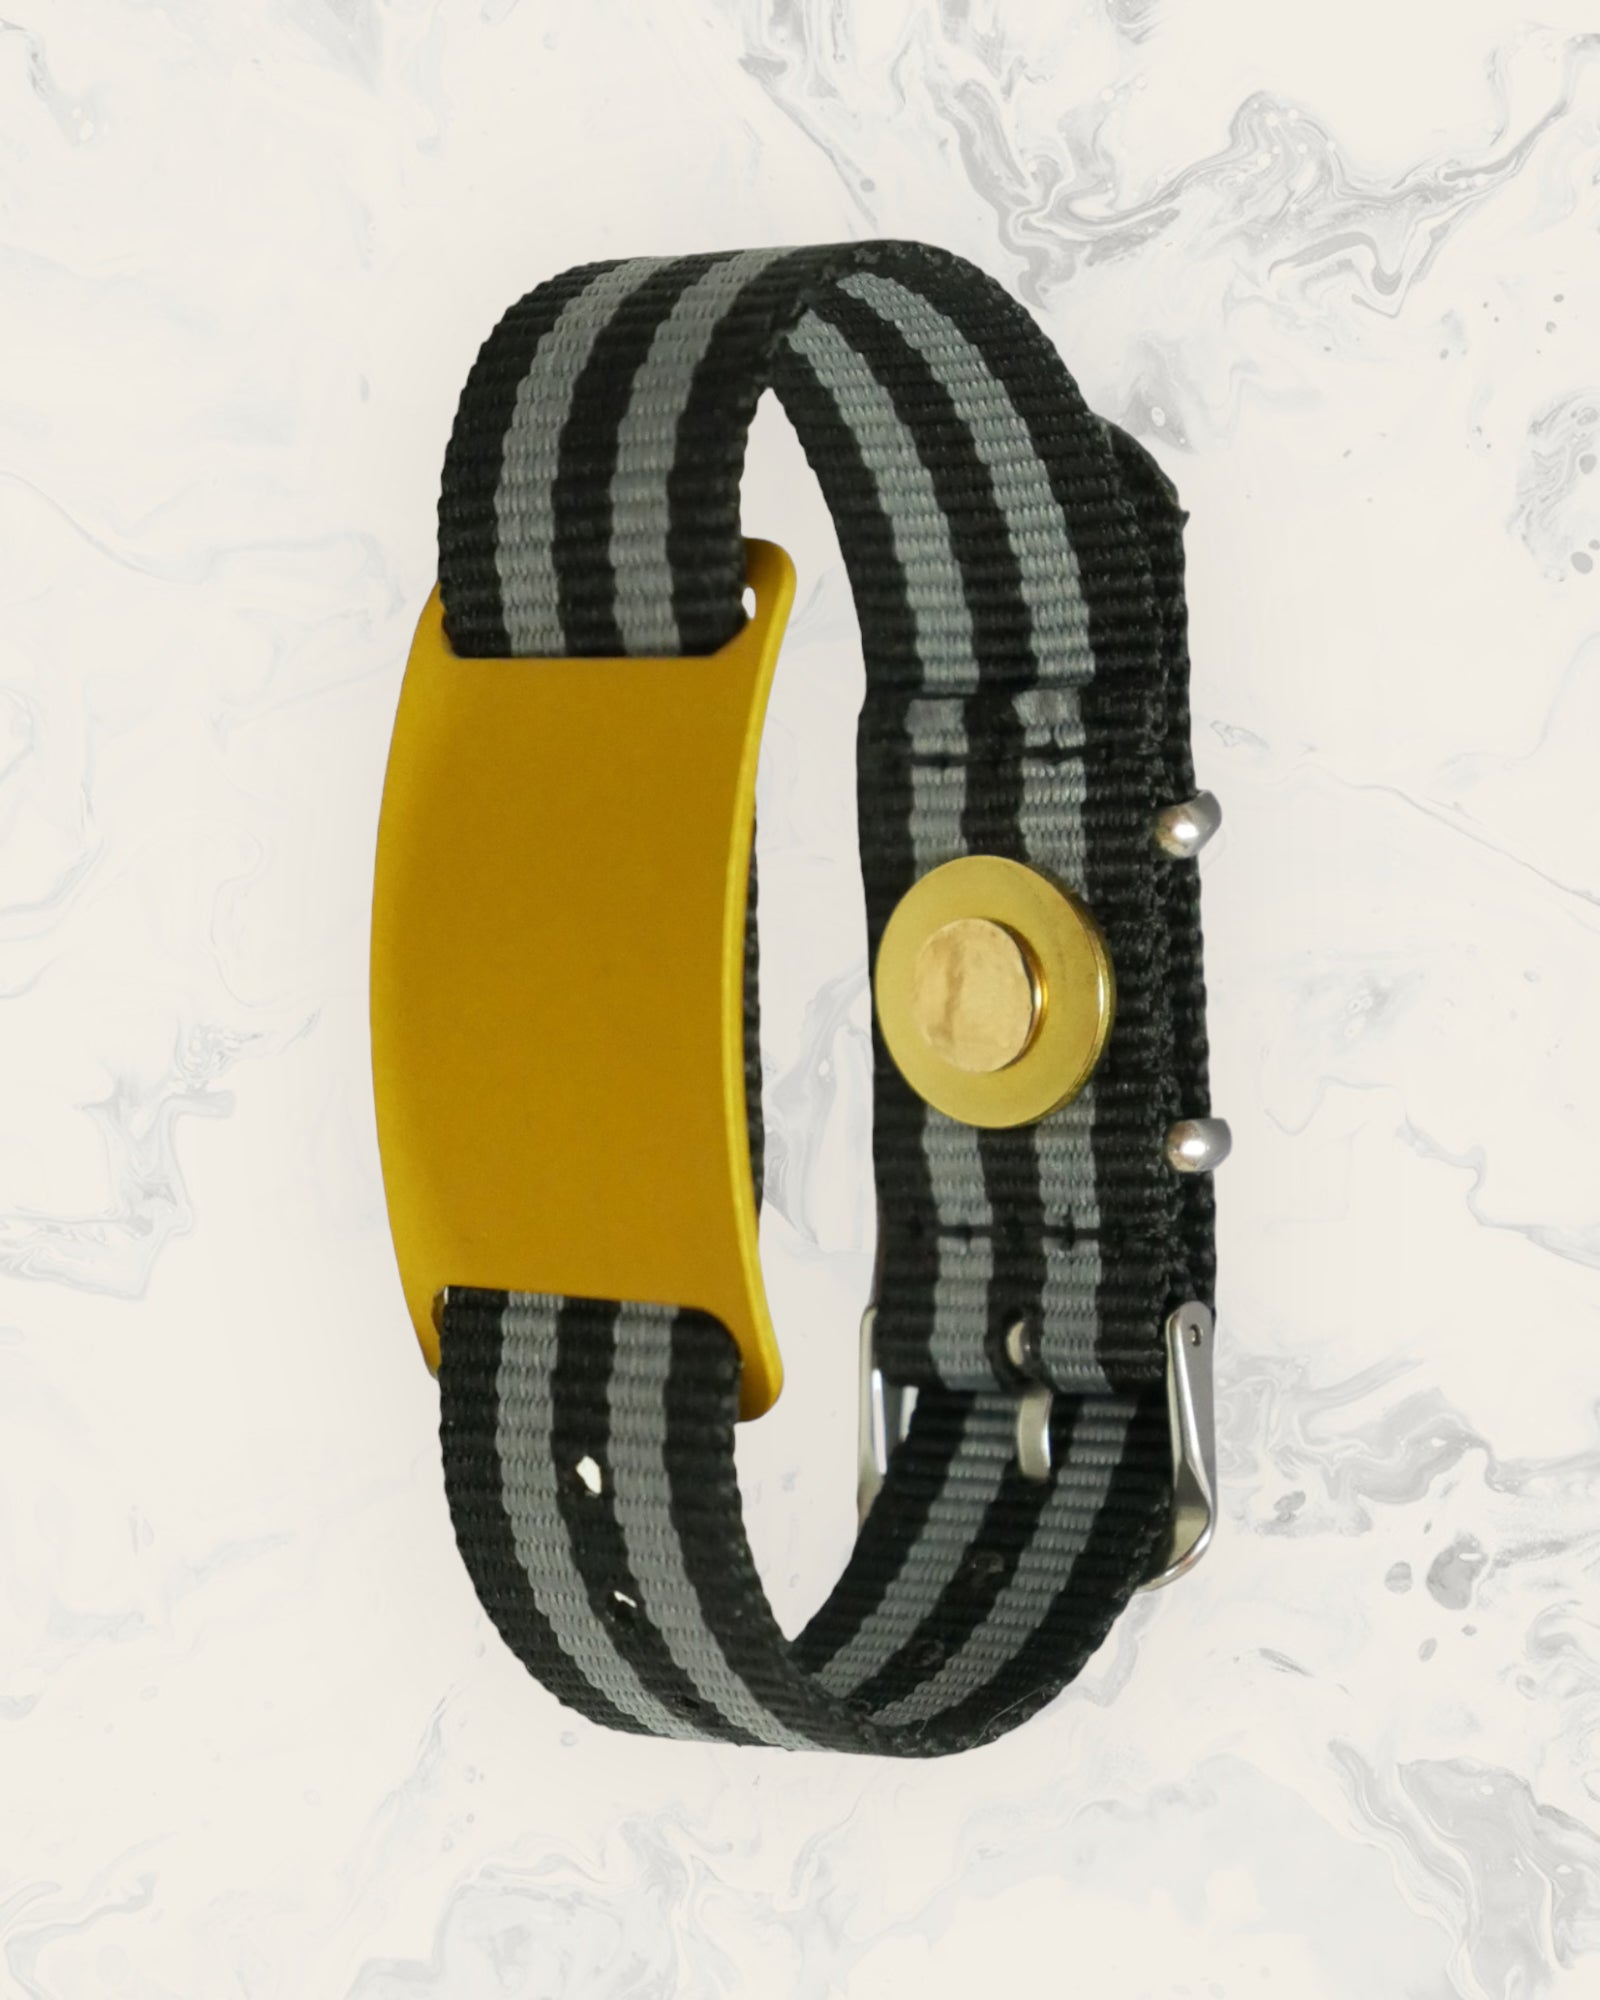 Frequency Jewelry Natural Pain Relief and EMF Protection Bracelet Nylon Band Color Black and Gray Striped with a Gold Slider